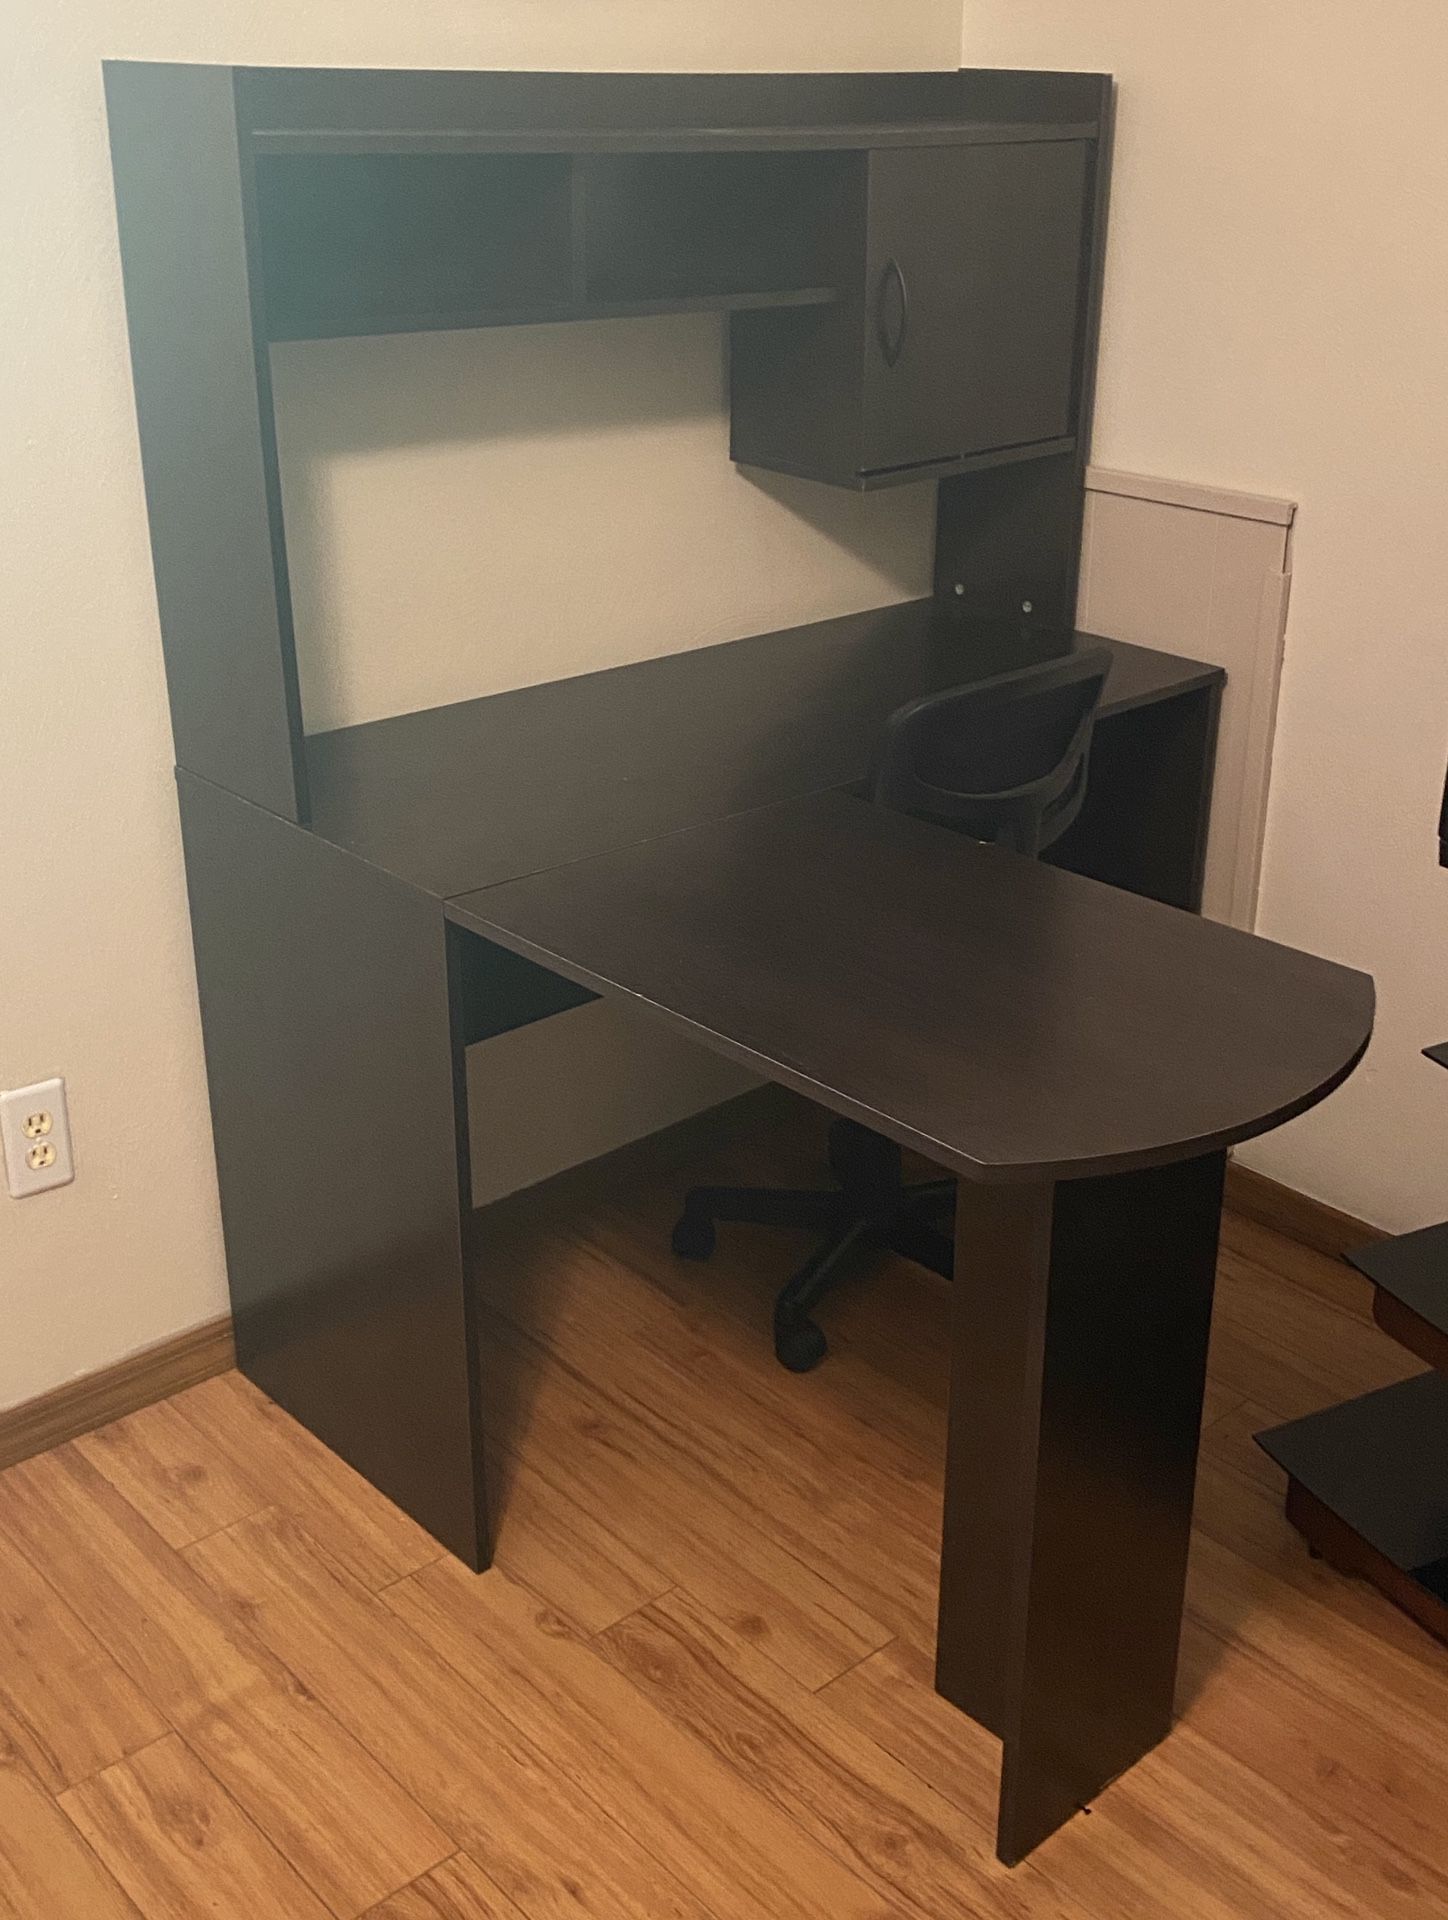 Black L Shaped Desk and chair - Like New